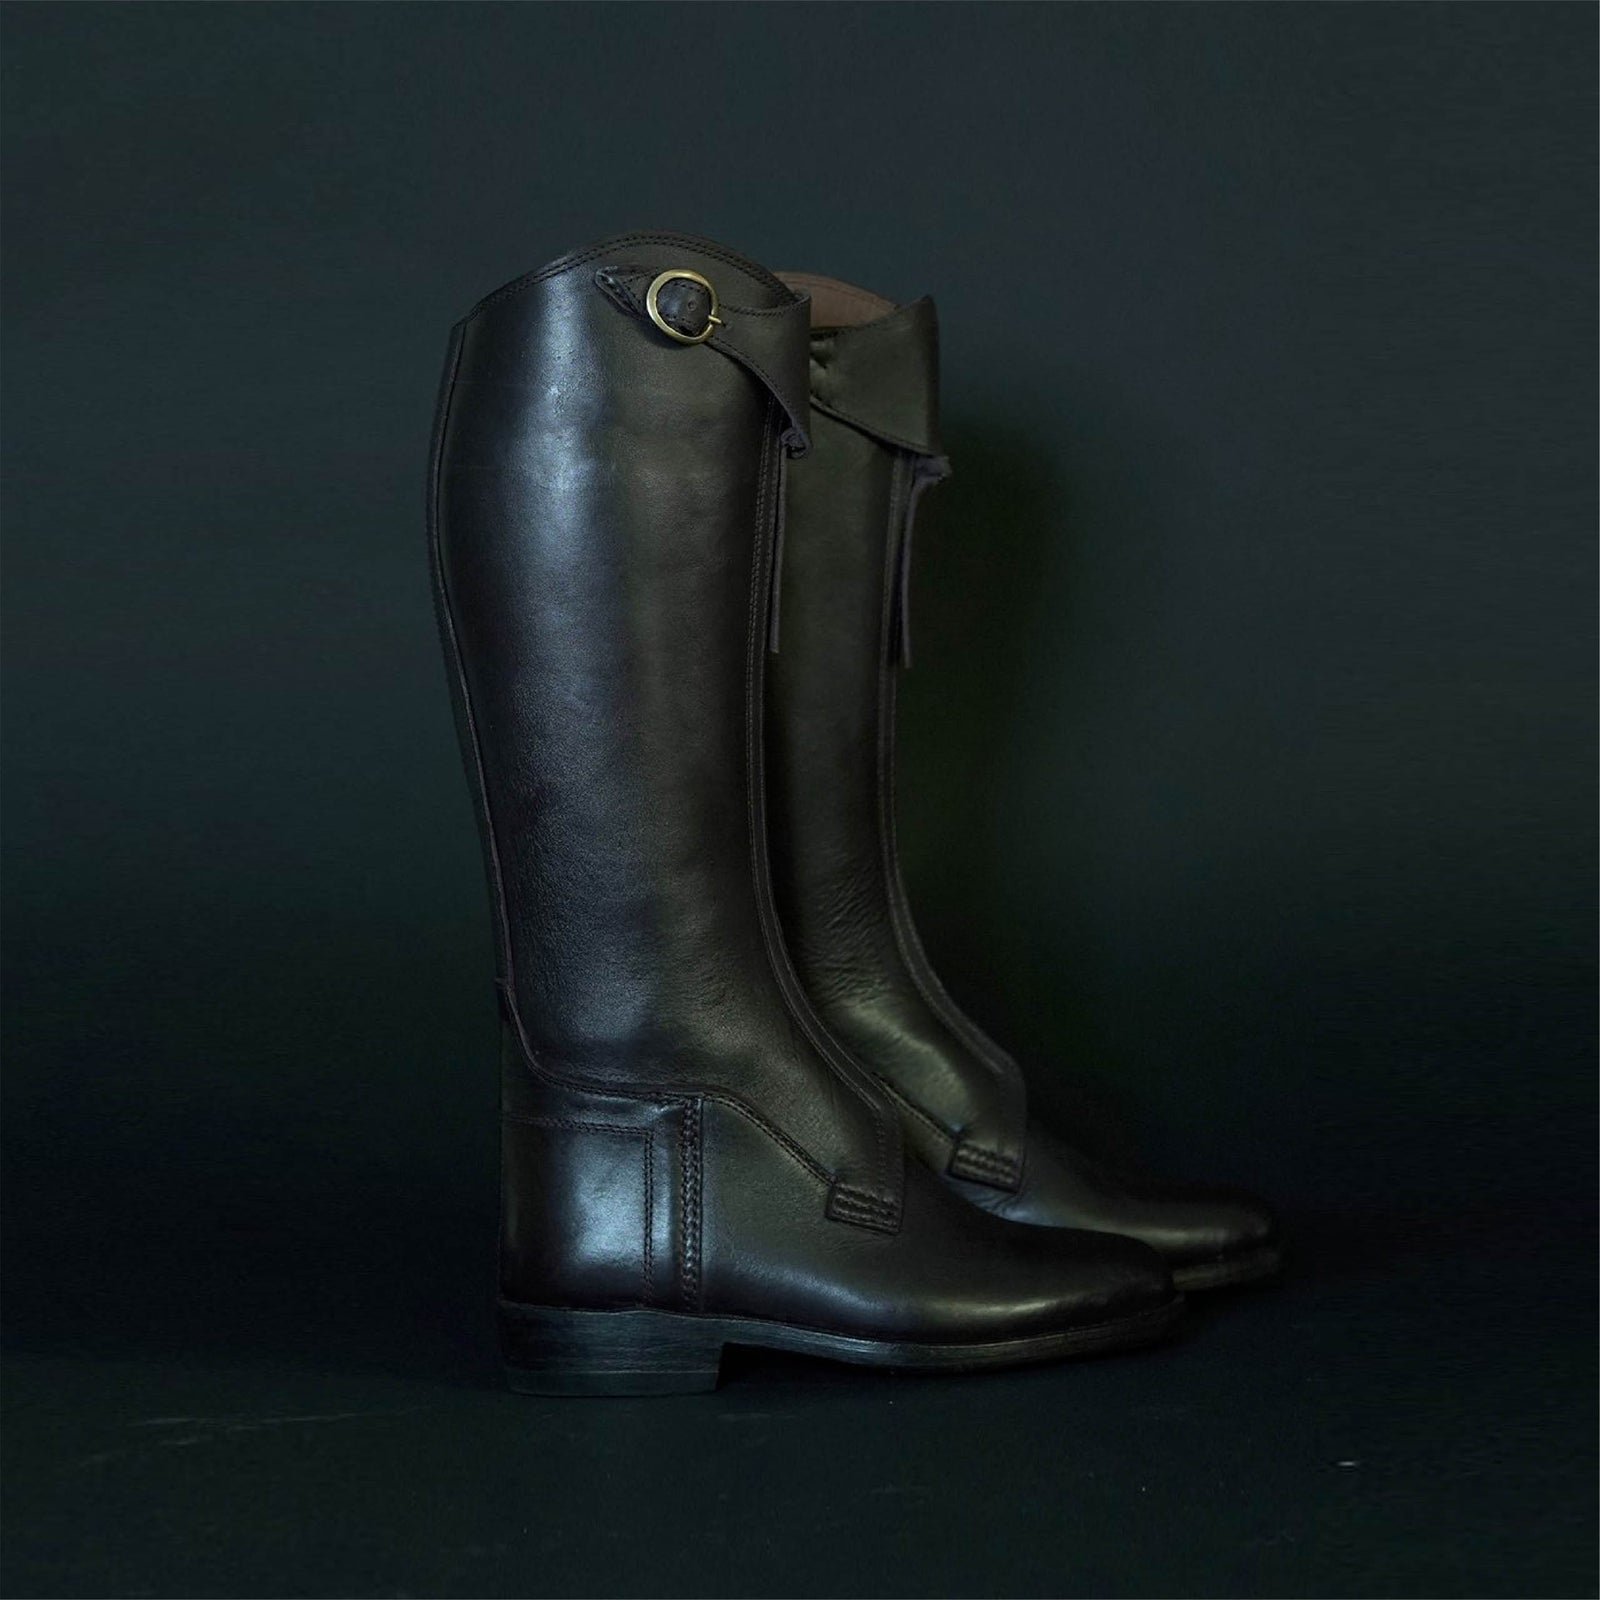 Photo of Junior Bespoke Polo Boot, number 3